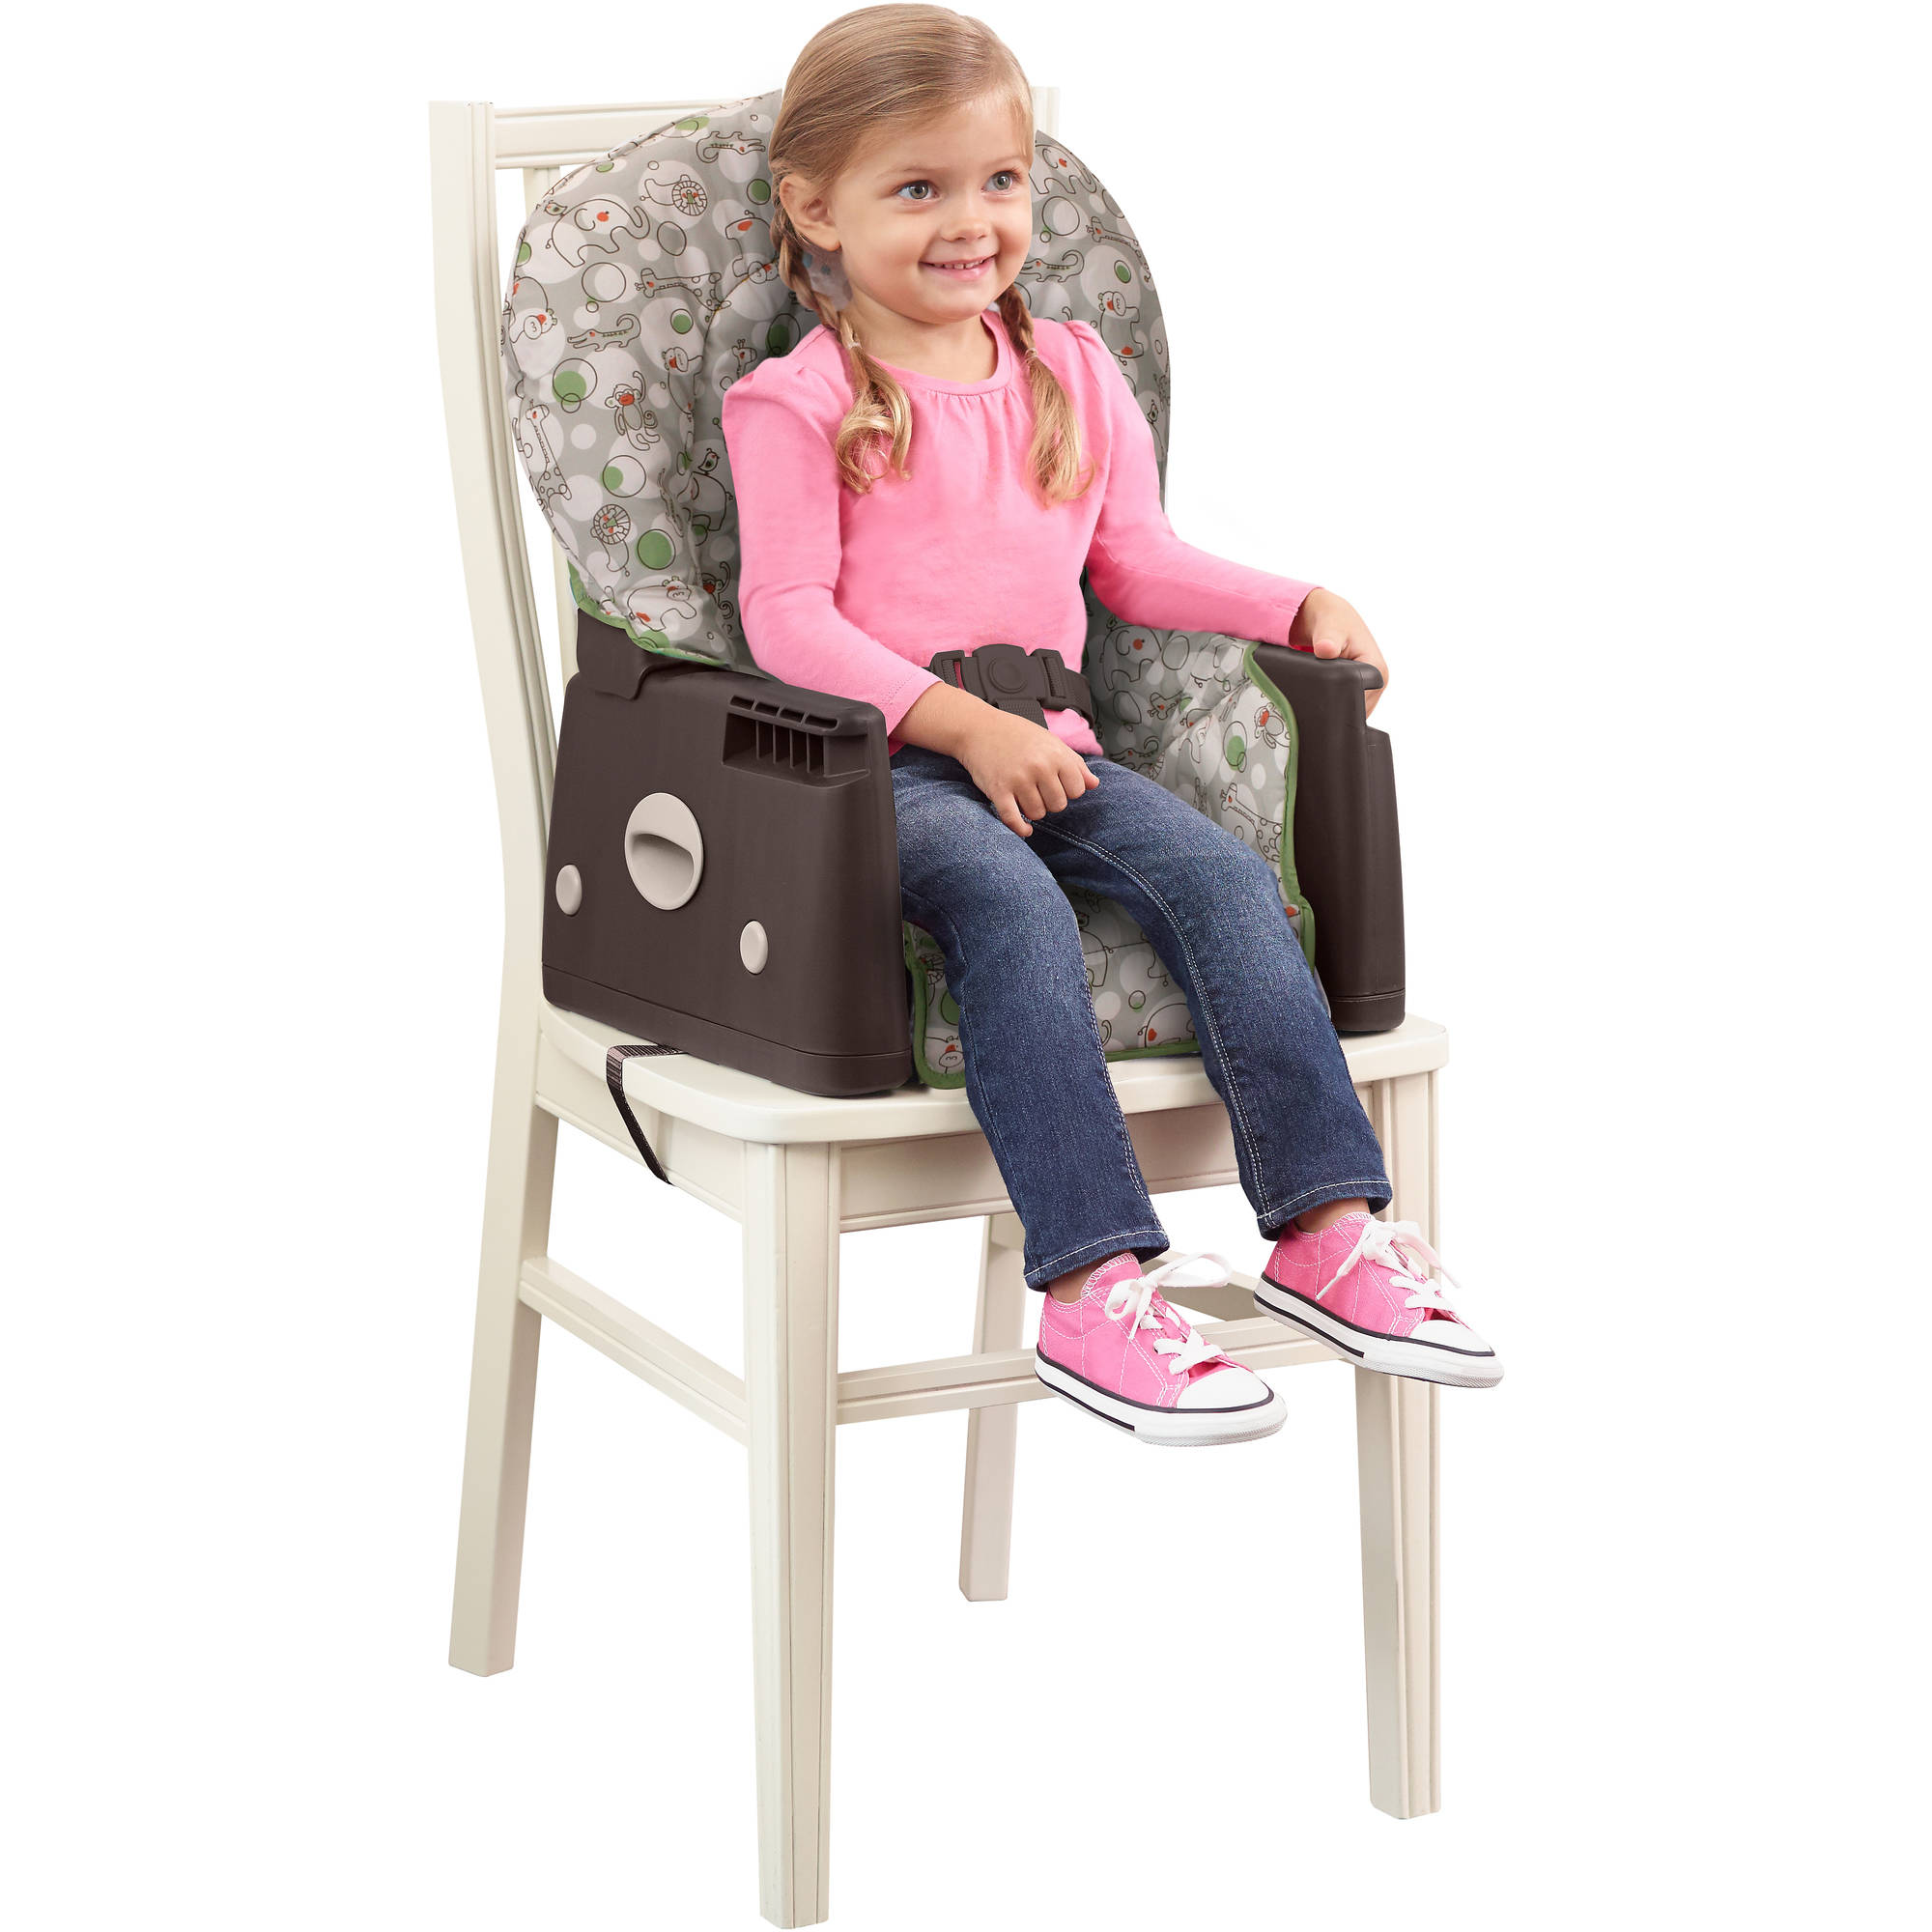 Buy Graco Simpleswitch 2 In 1 Convertible High Chair